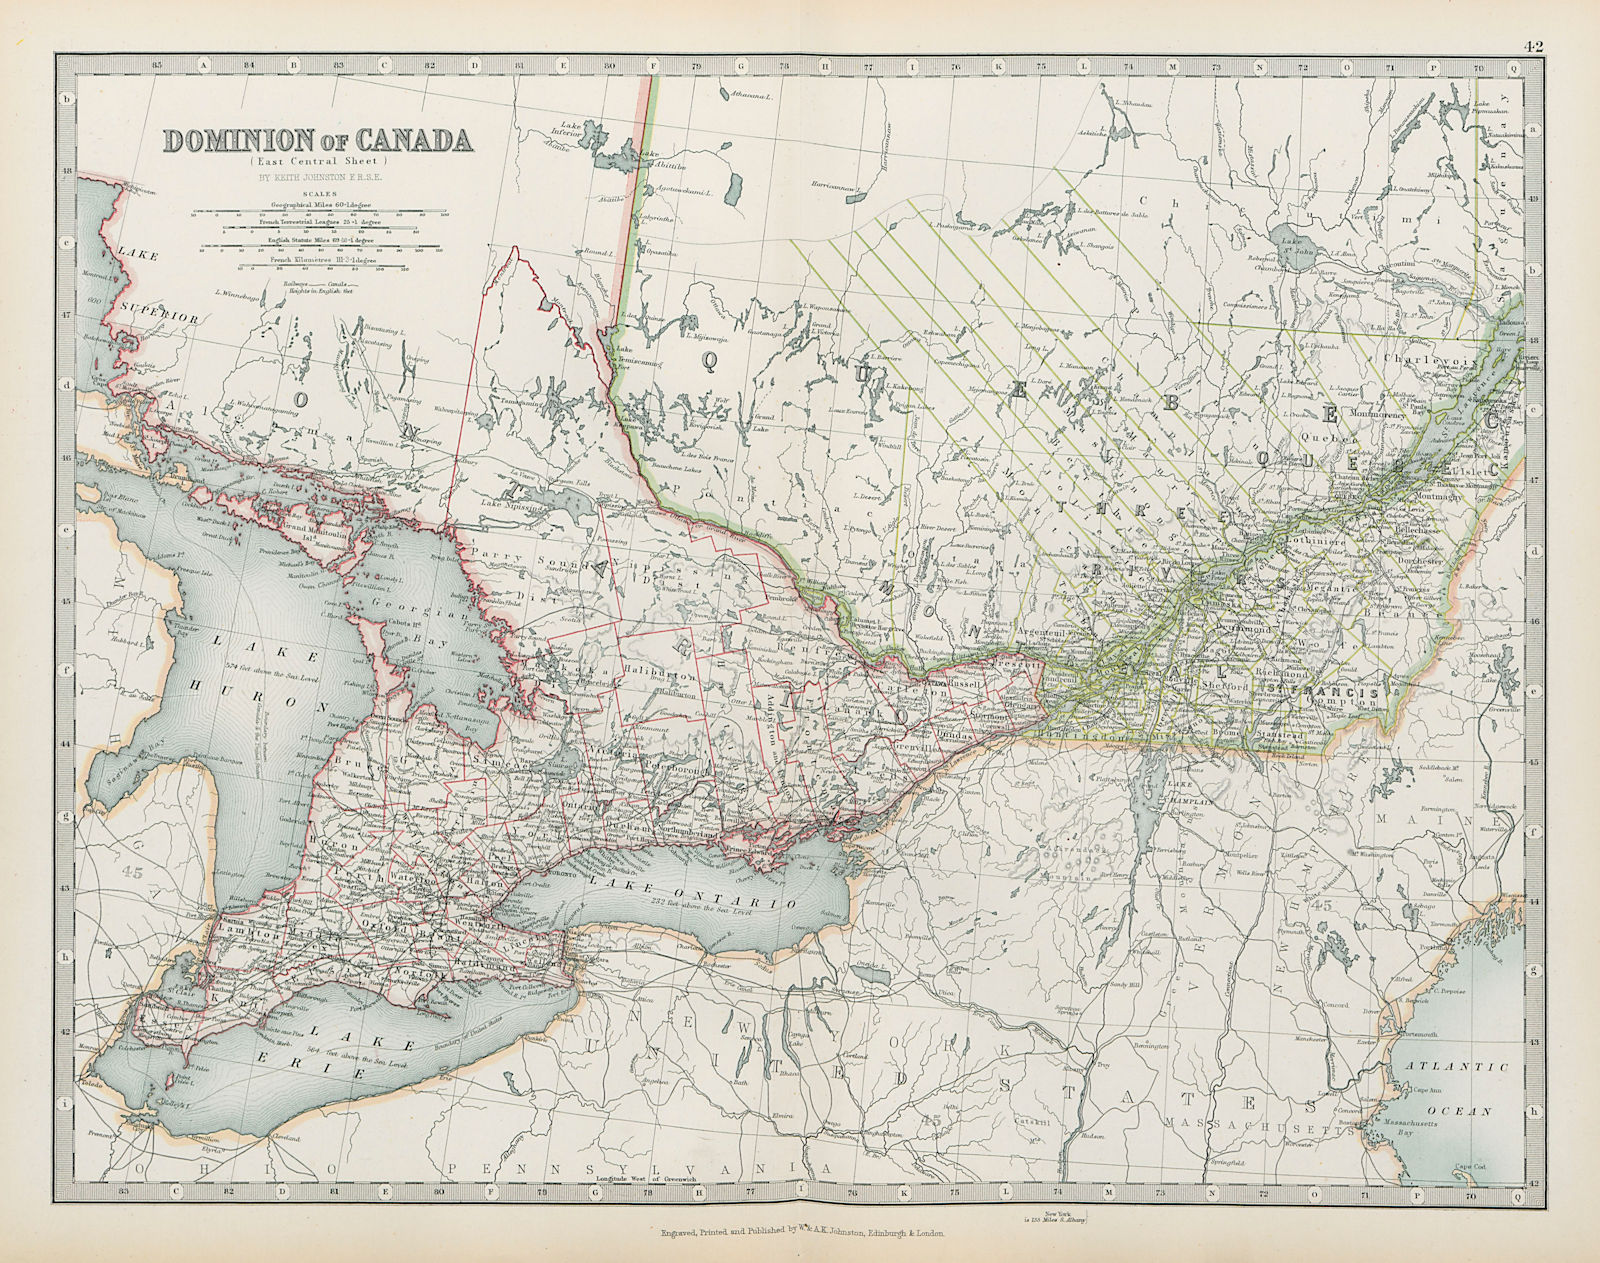 DOMINION OF CANADA Ontario & Quebec showing counties JOHNSTON 1901 old map